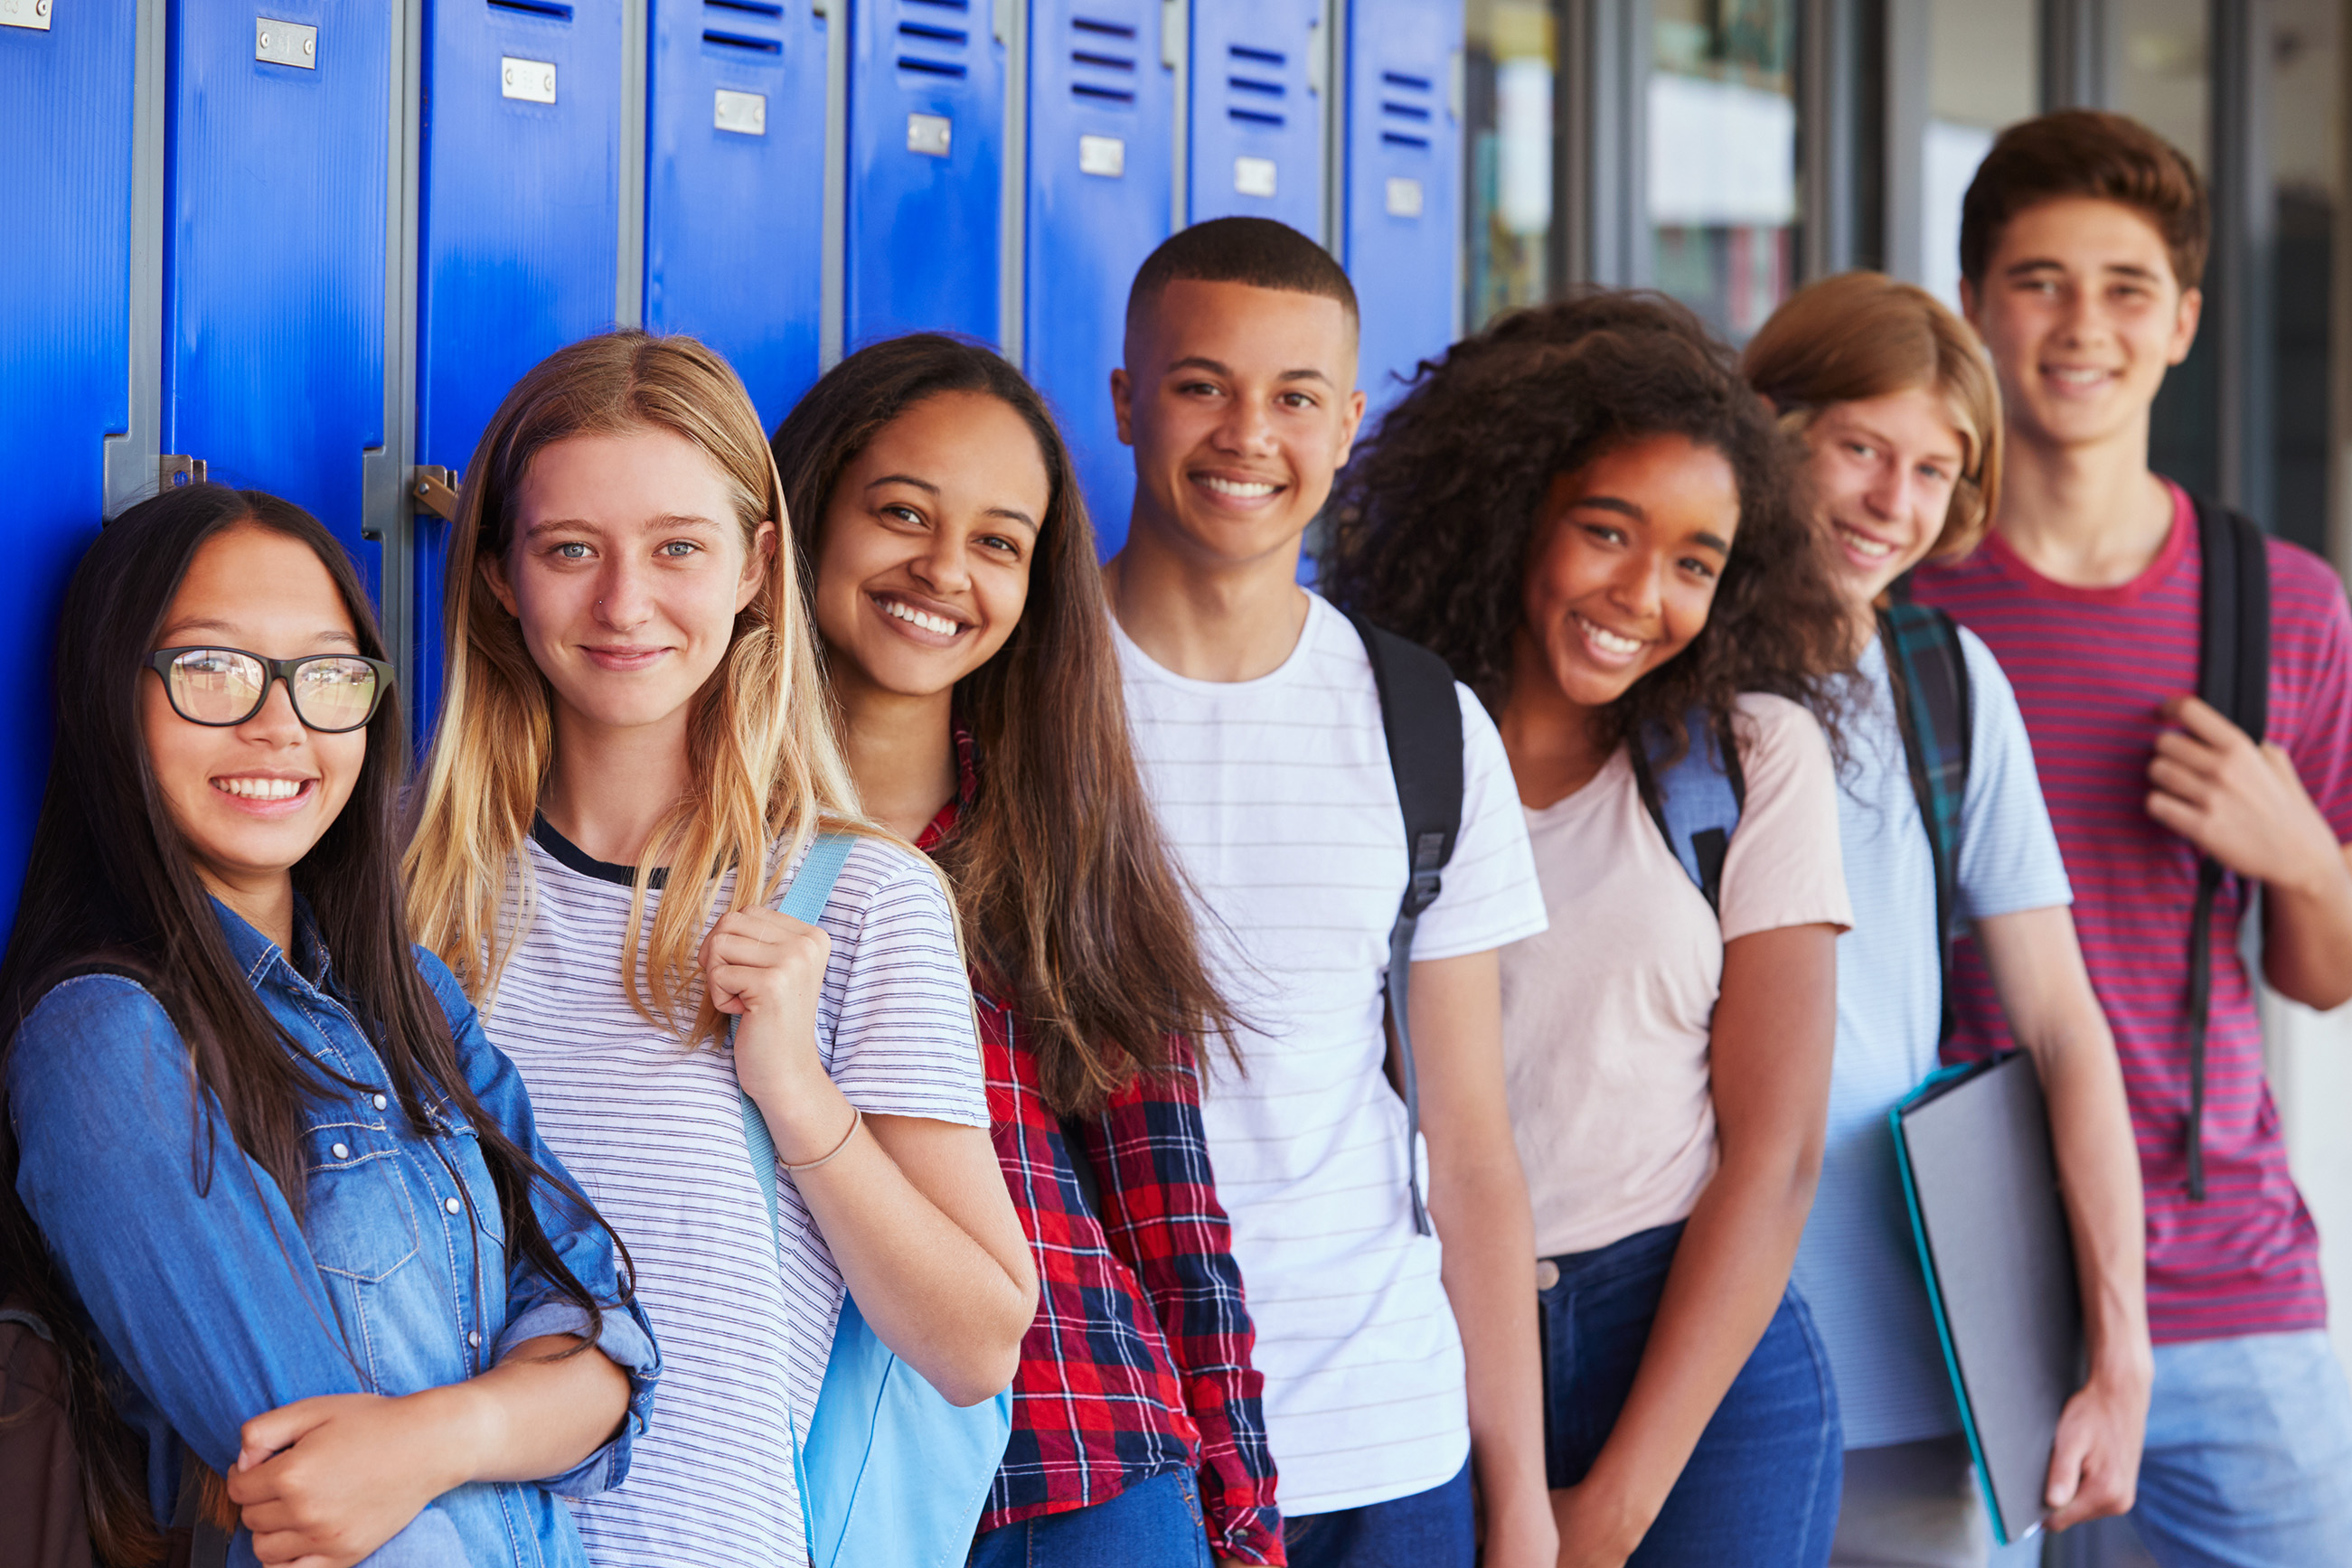 Image of a group of teens standing together in front of school lockers